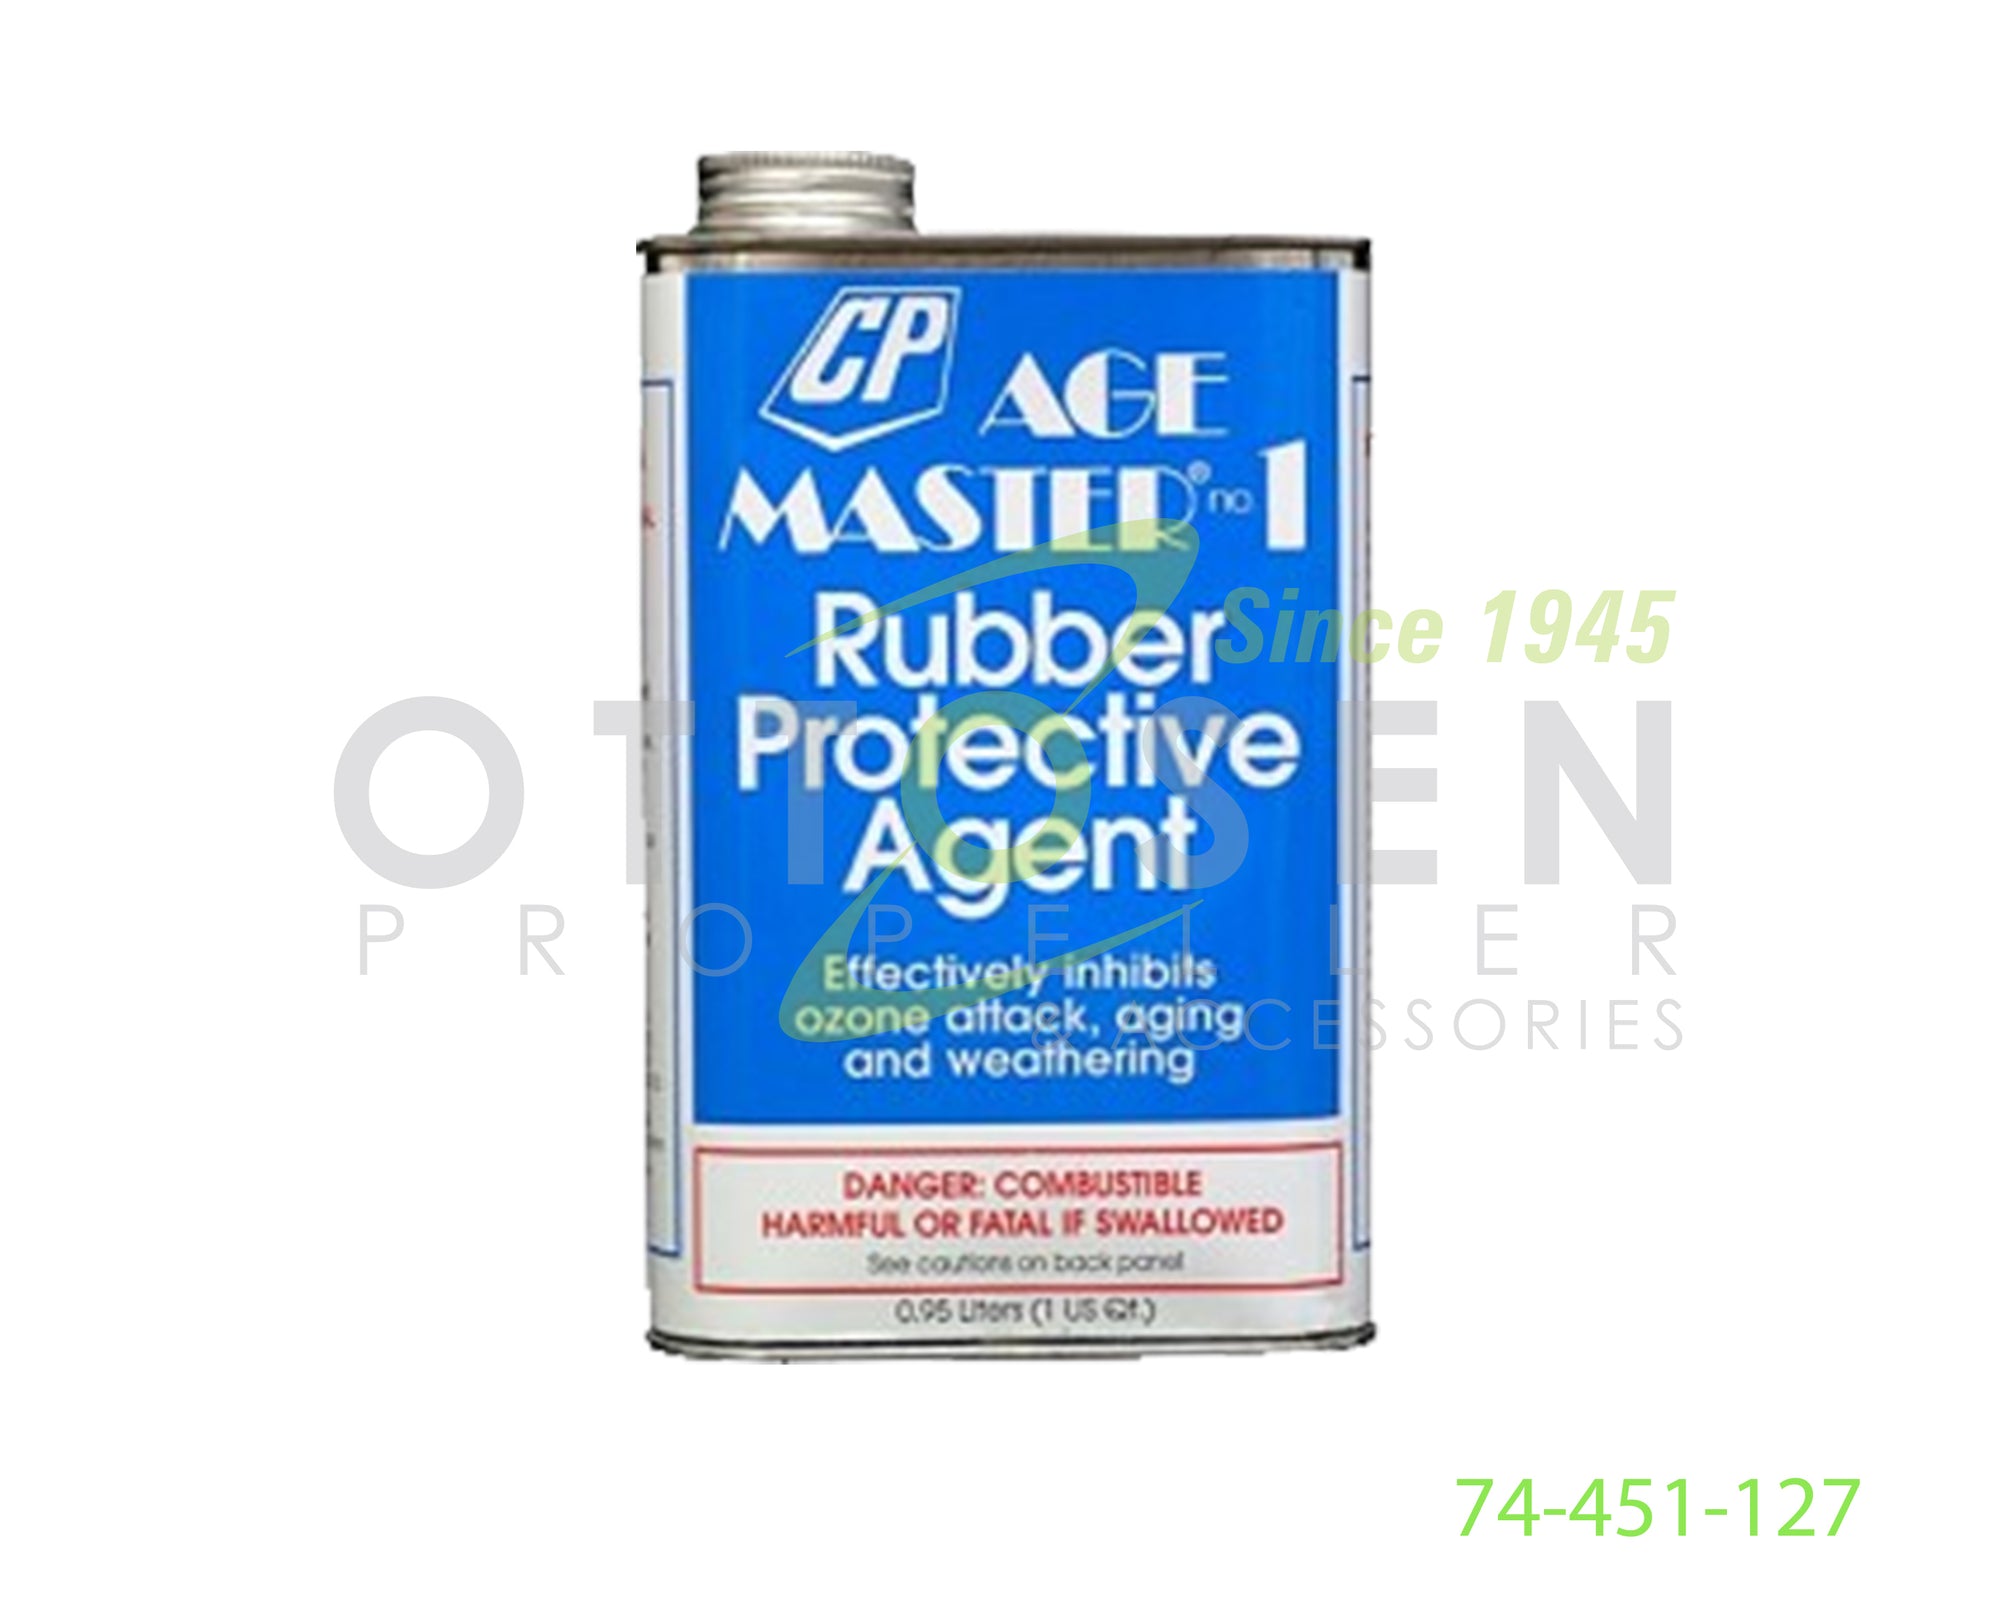 74-451-127-GOODRICH-AGE-MASTER-RUBBER-PROTECTIVE-AGENT-PICTURE-1